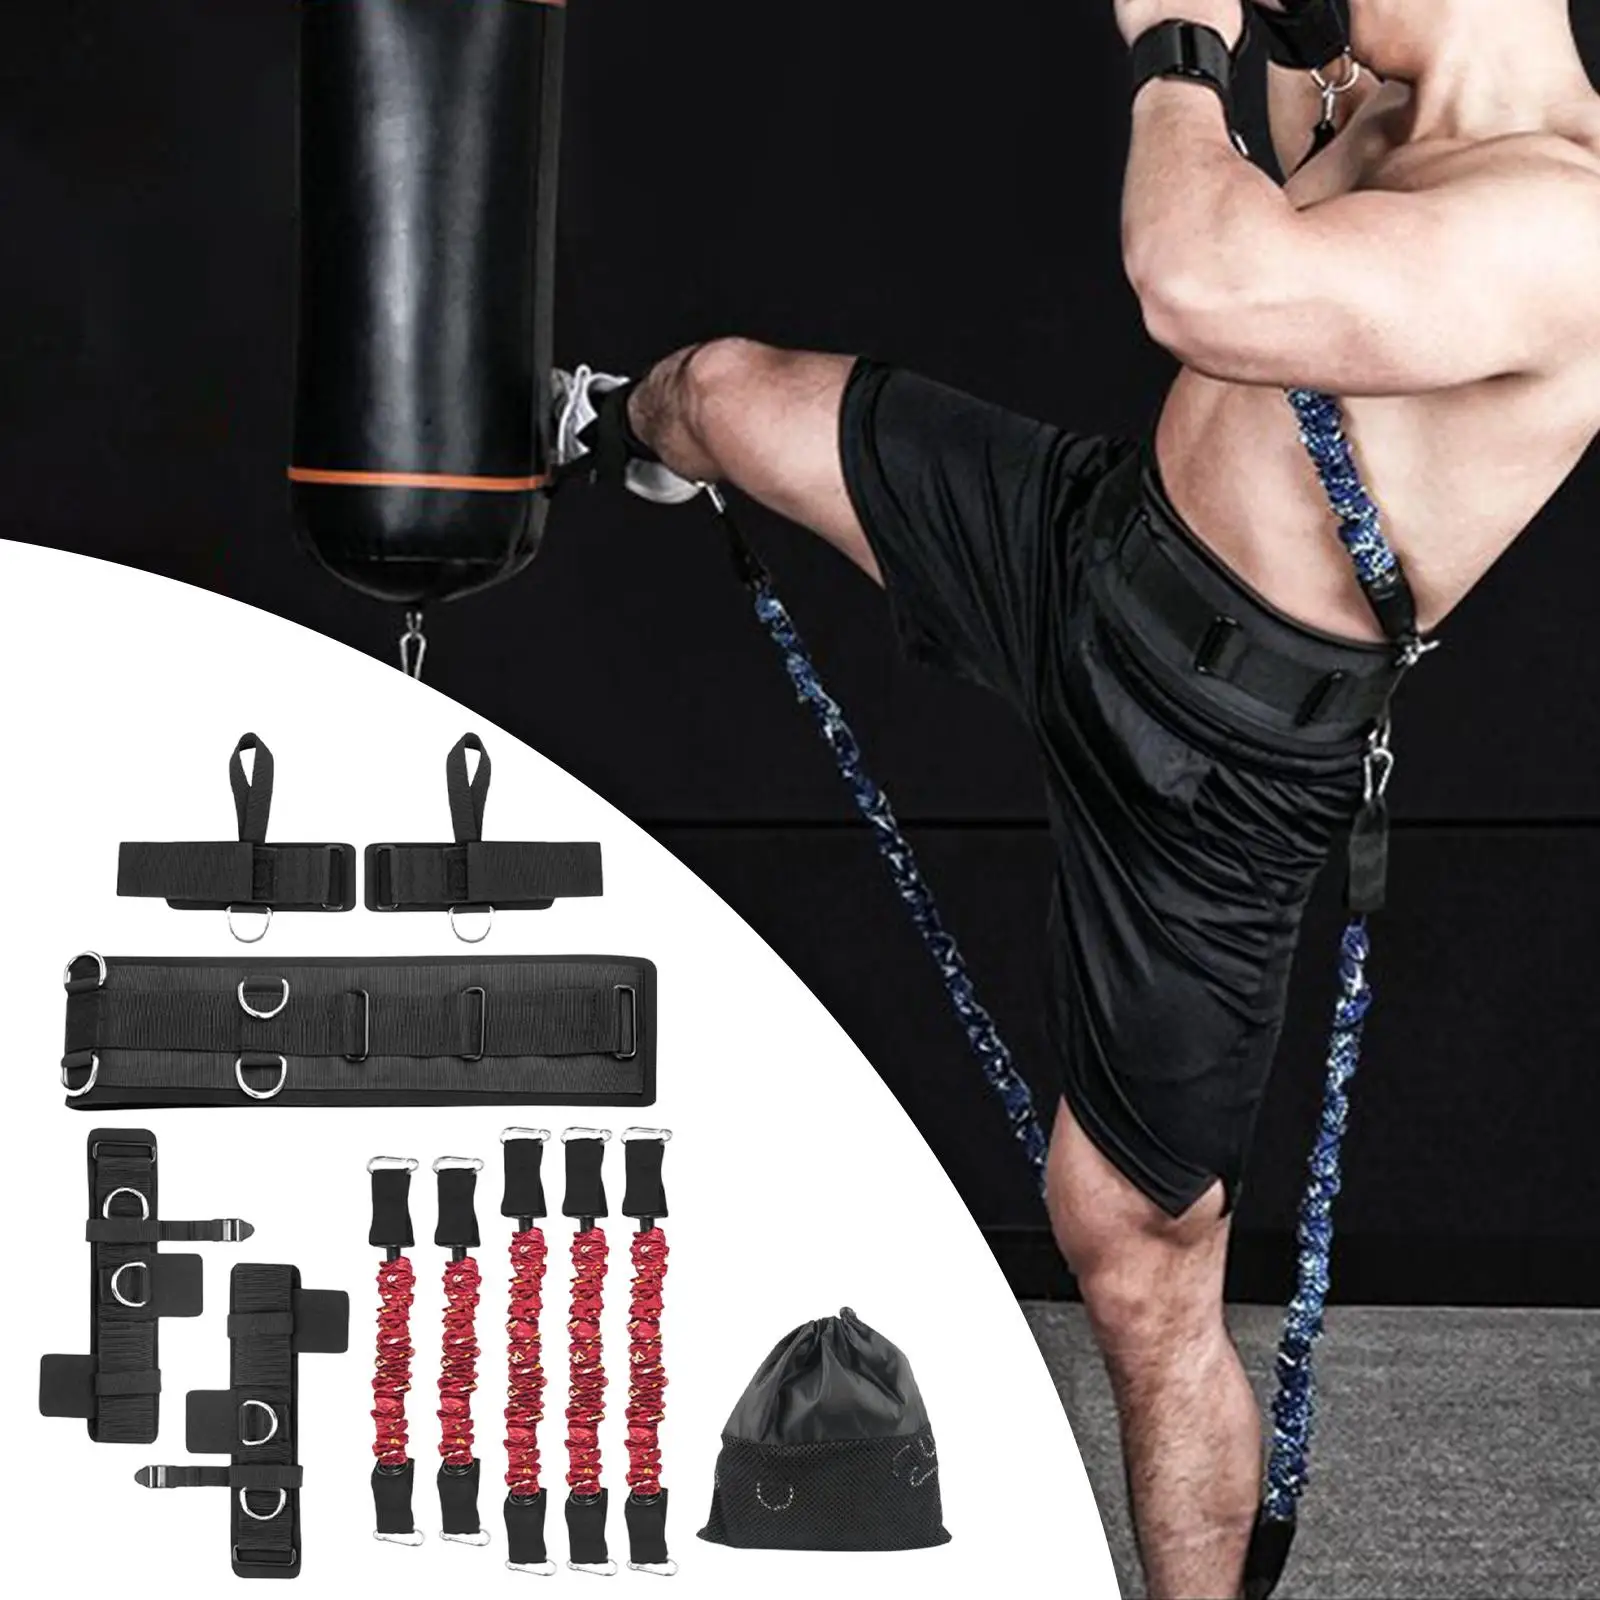 Boxing Resistance Training Exercise Band Kit Premium Materials Accessories